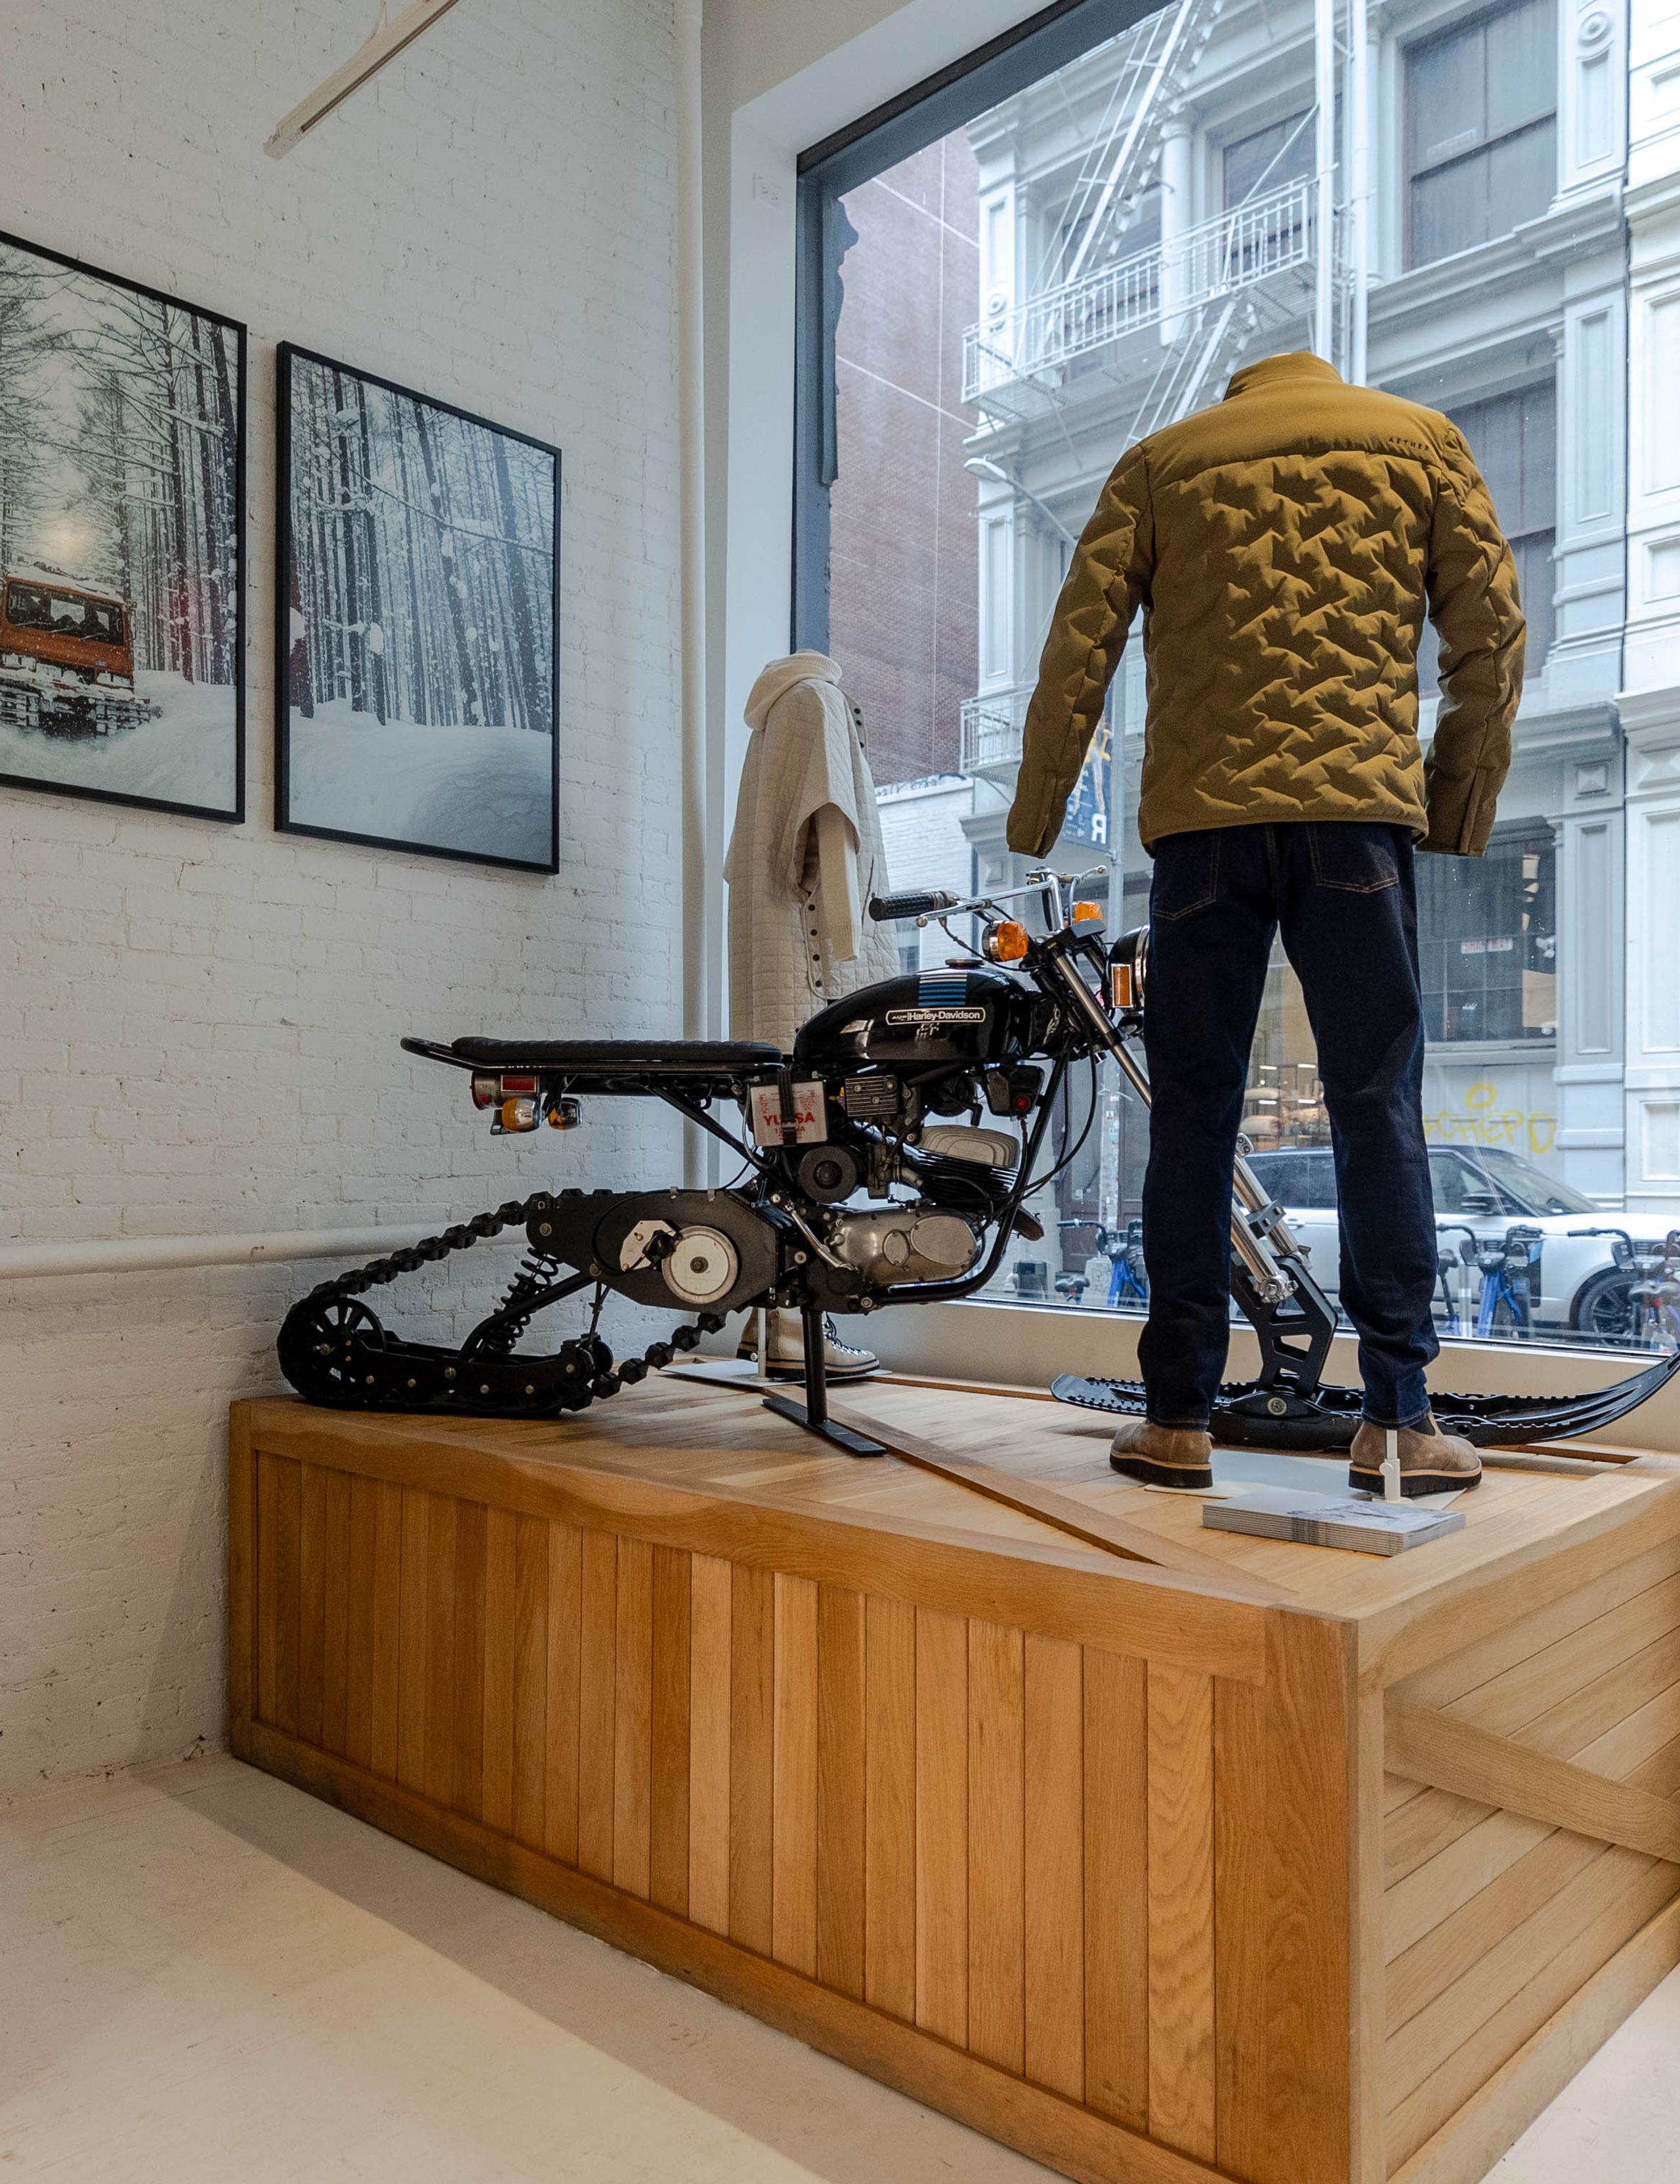 Interior view of front window display with Harley snow bike and mannequins